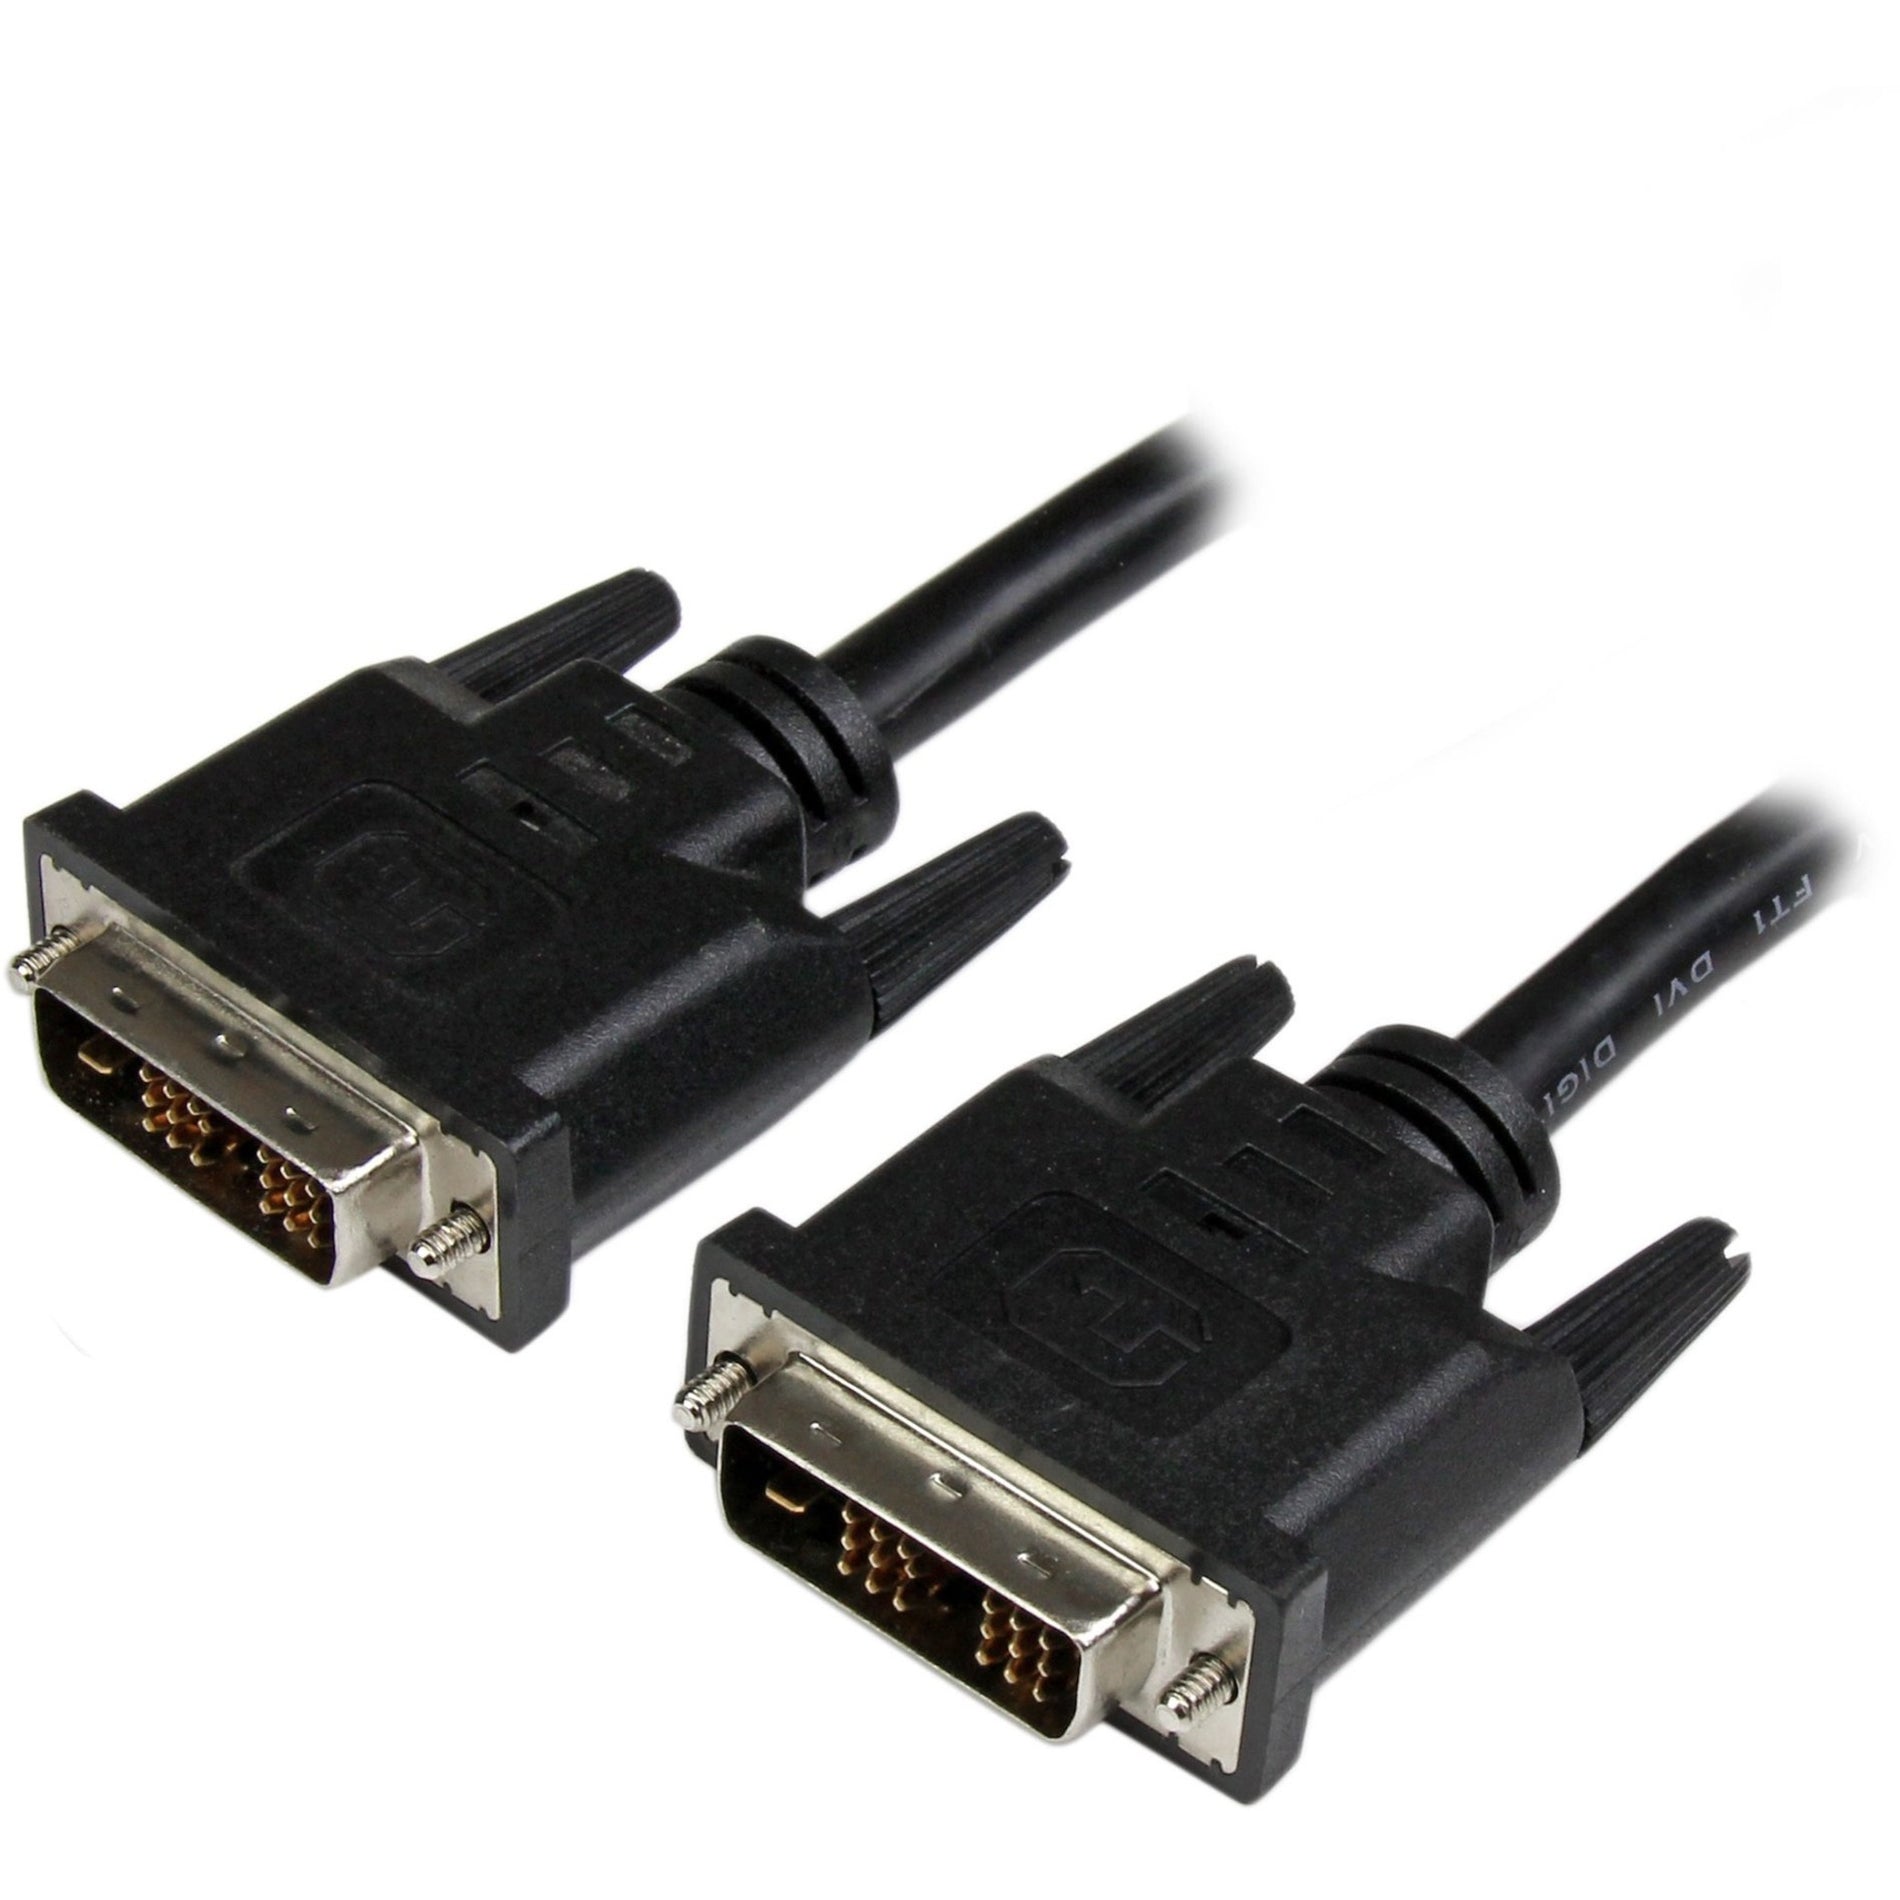 StarTech.com DVIMM18IN 18in DVI-D Single Link Cable - M/M, Copper Conductor, 5 Gbit/s Data Transfer Rate, 1920 x 1200 Supported Resolution